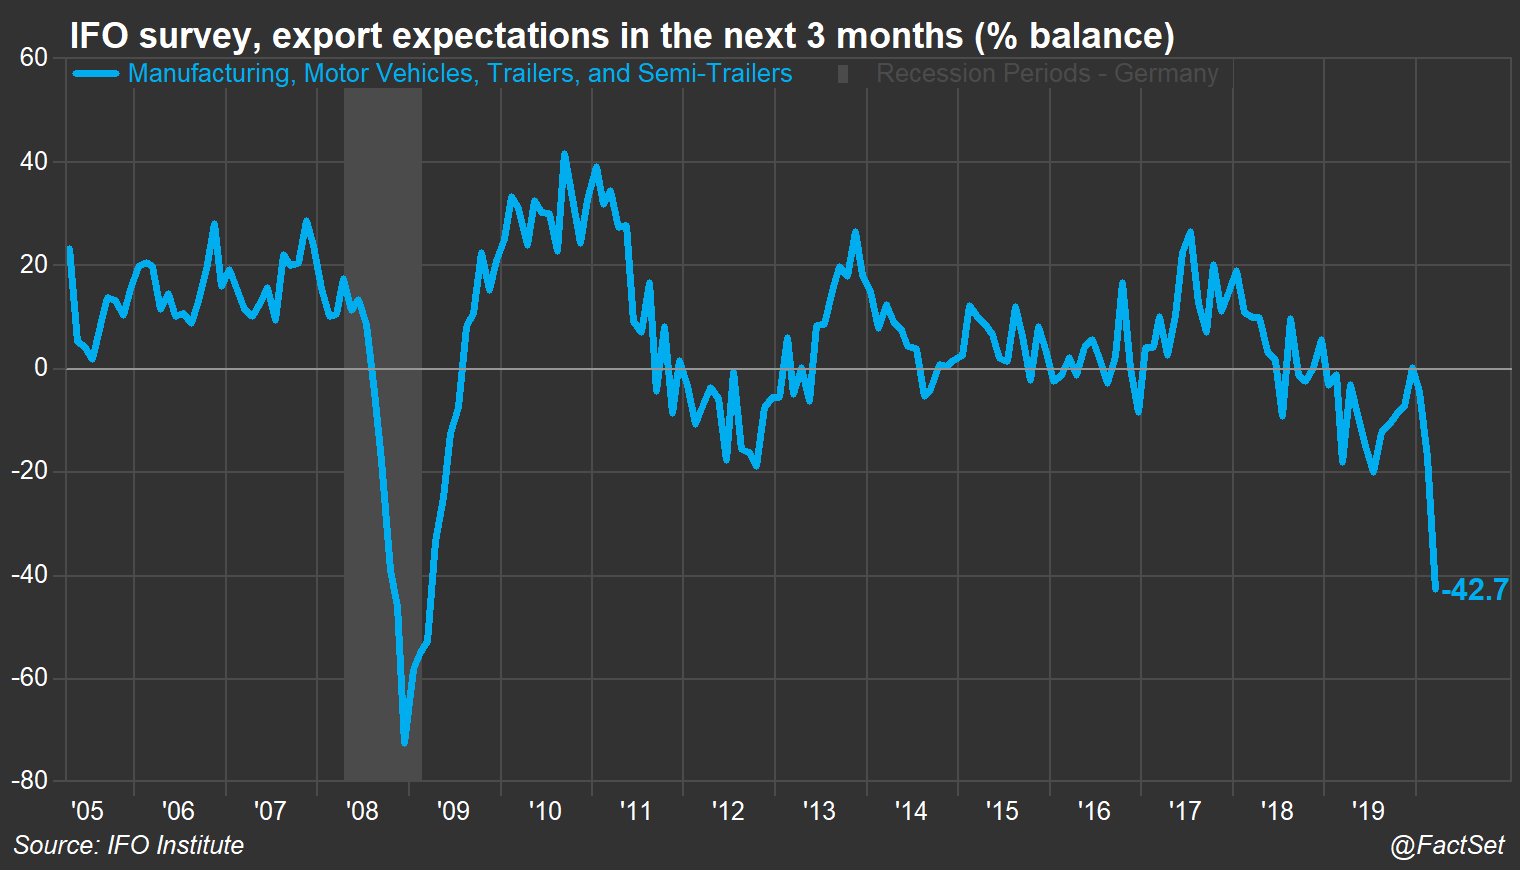 IFO auto industry 3 month export expectations